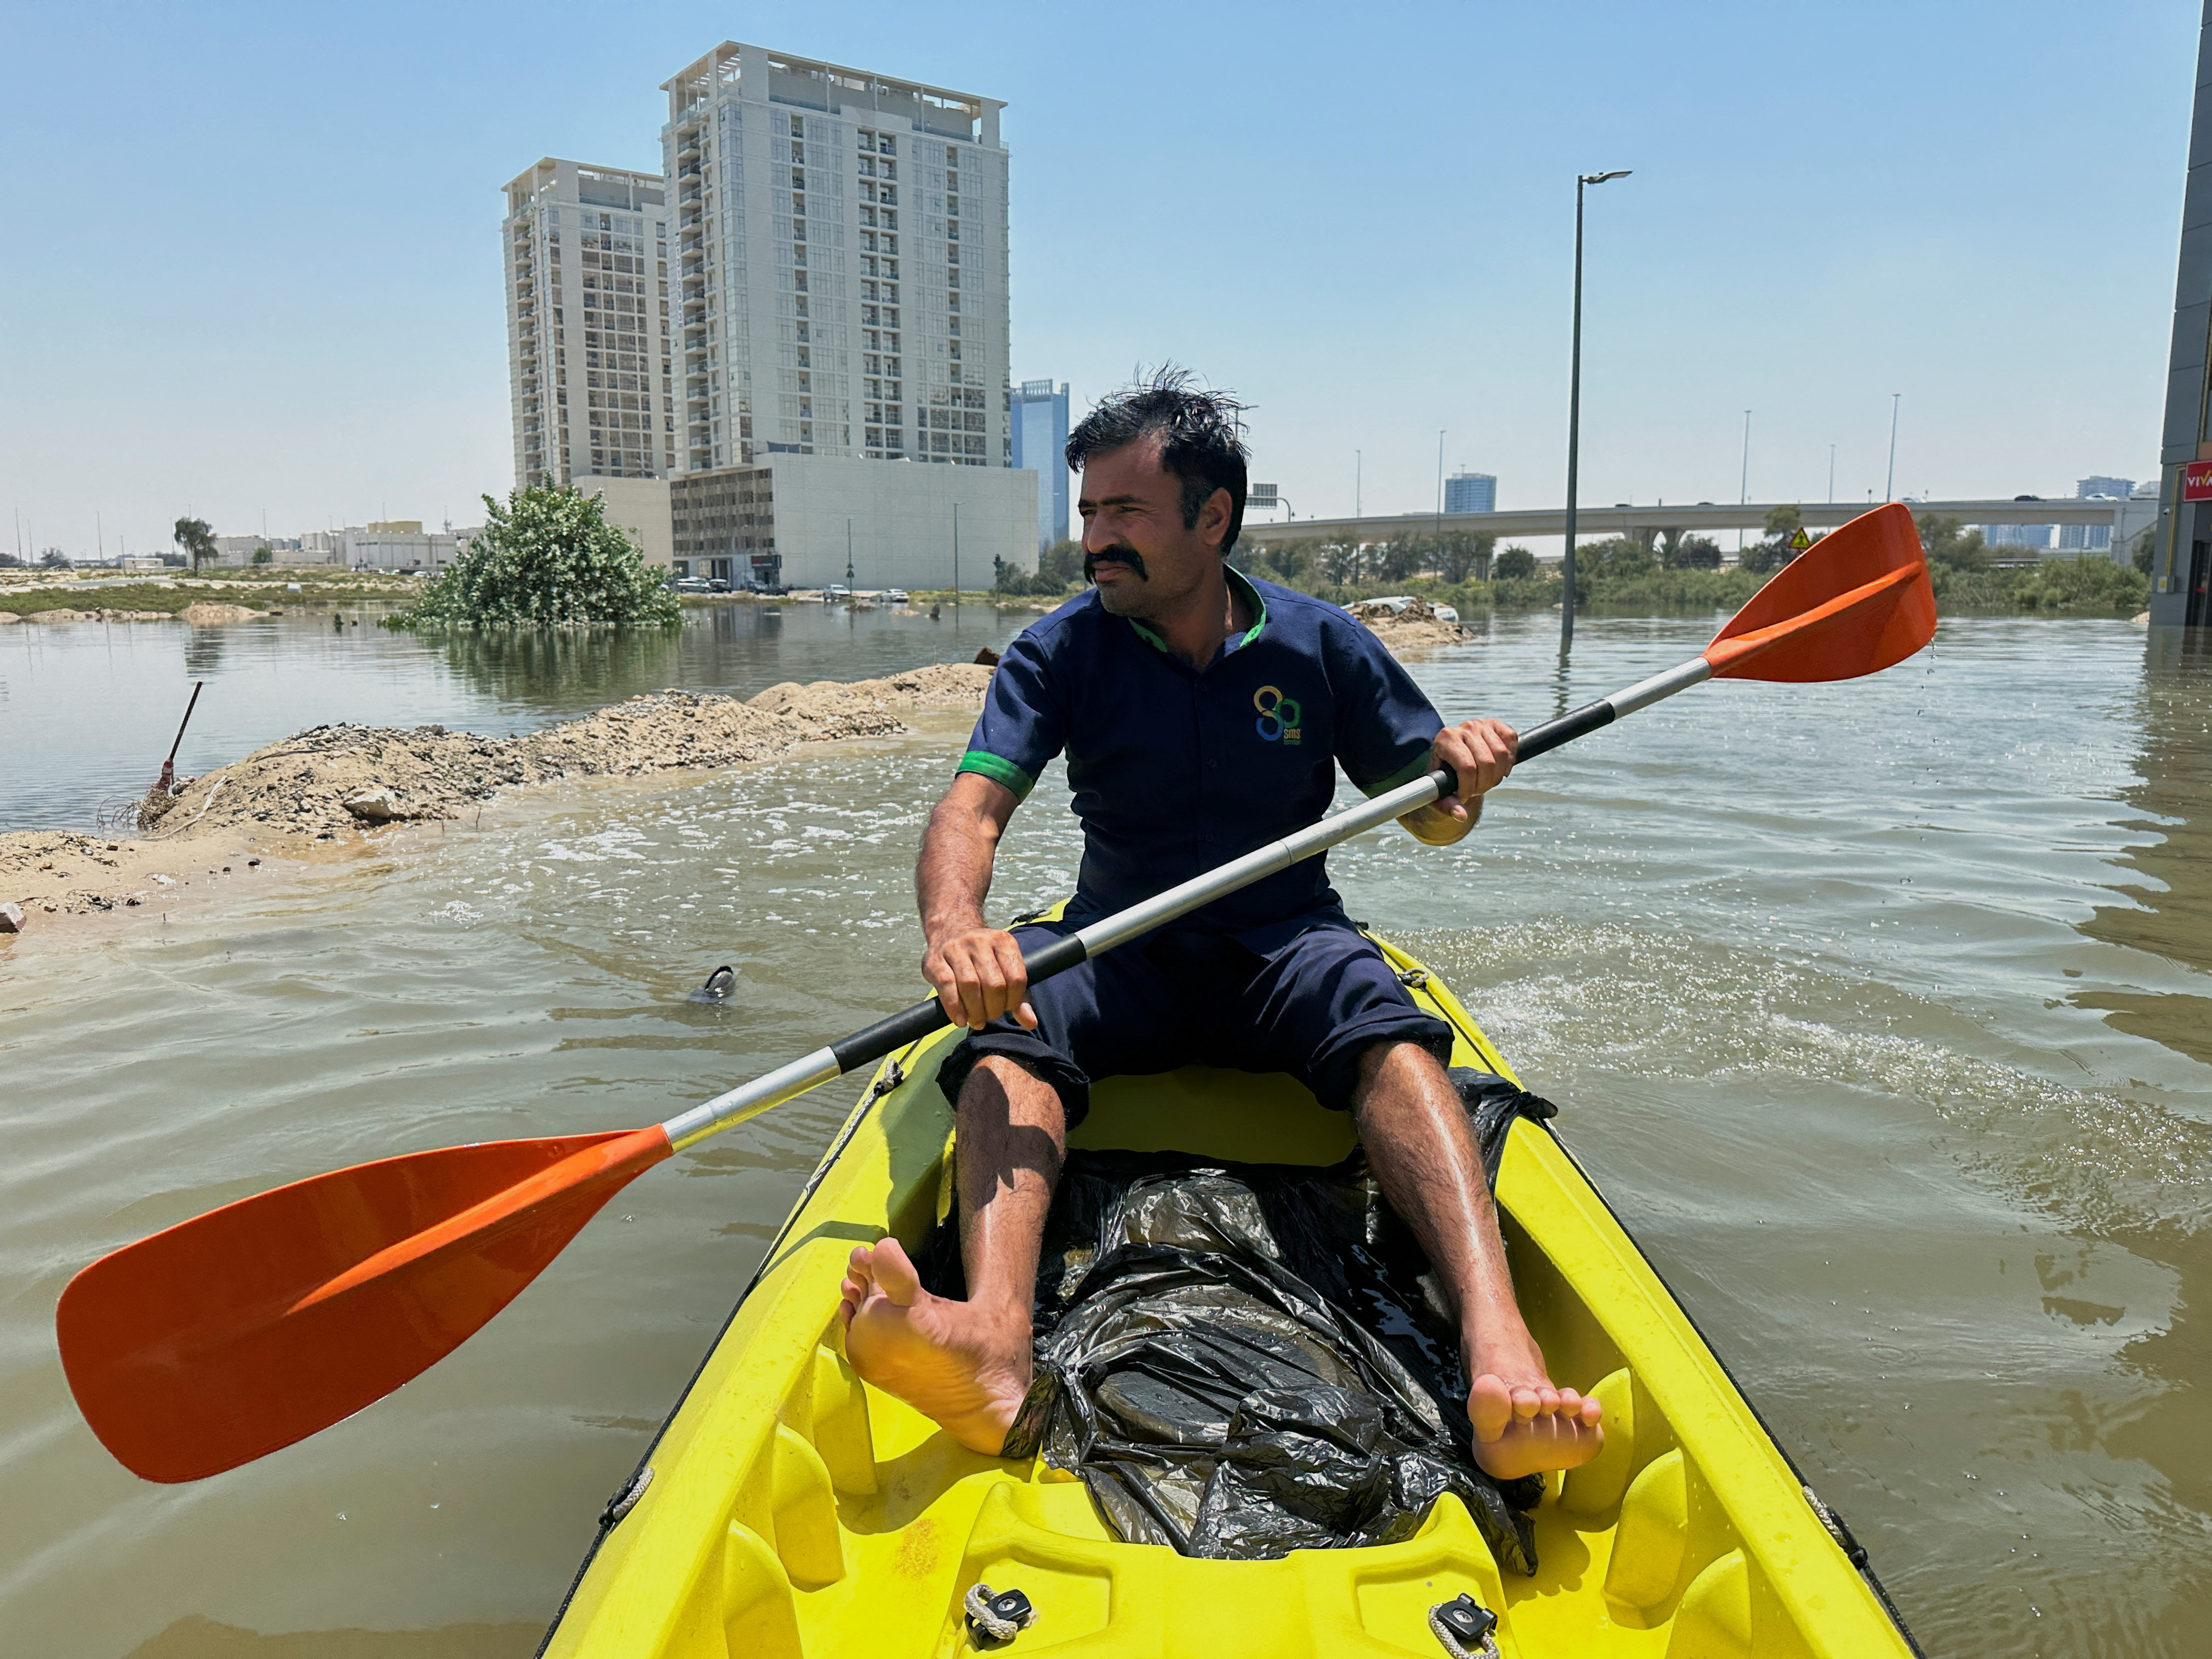 A volunteer uses a kayak during a rescue operation through a road flooded due to heavy rains in Dubai